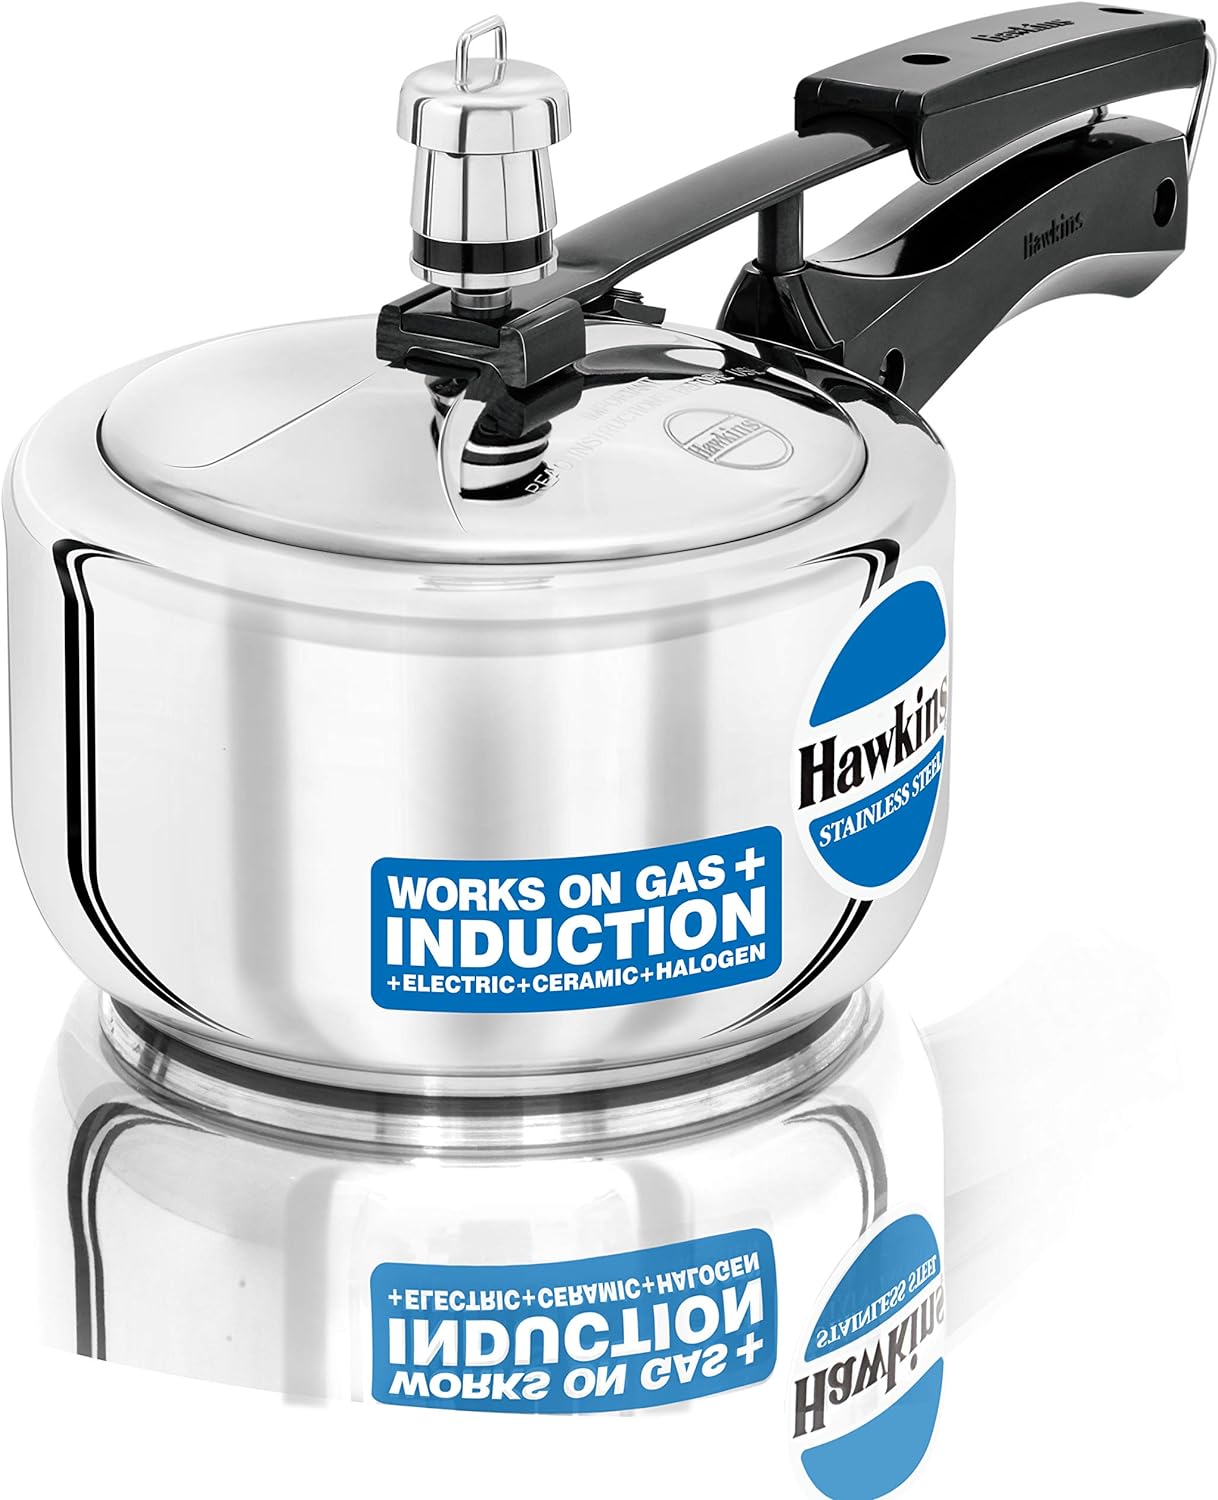 Hawkins 2 Liter Stainless Steel Pressure Cooker (Gas + Induction + Electric)